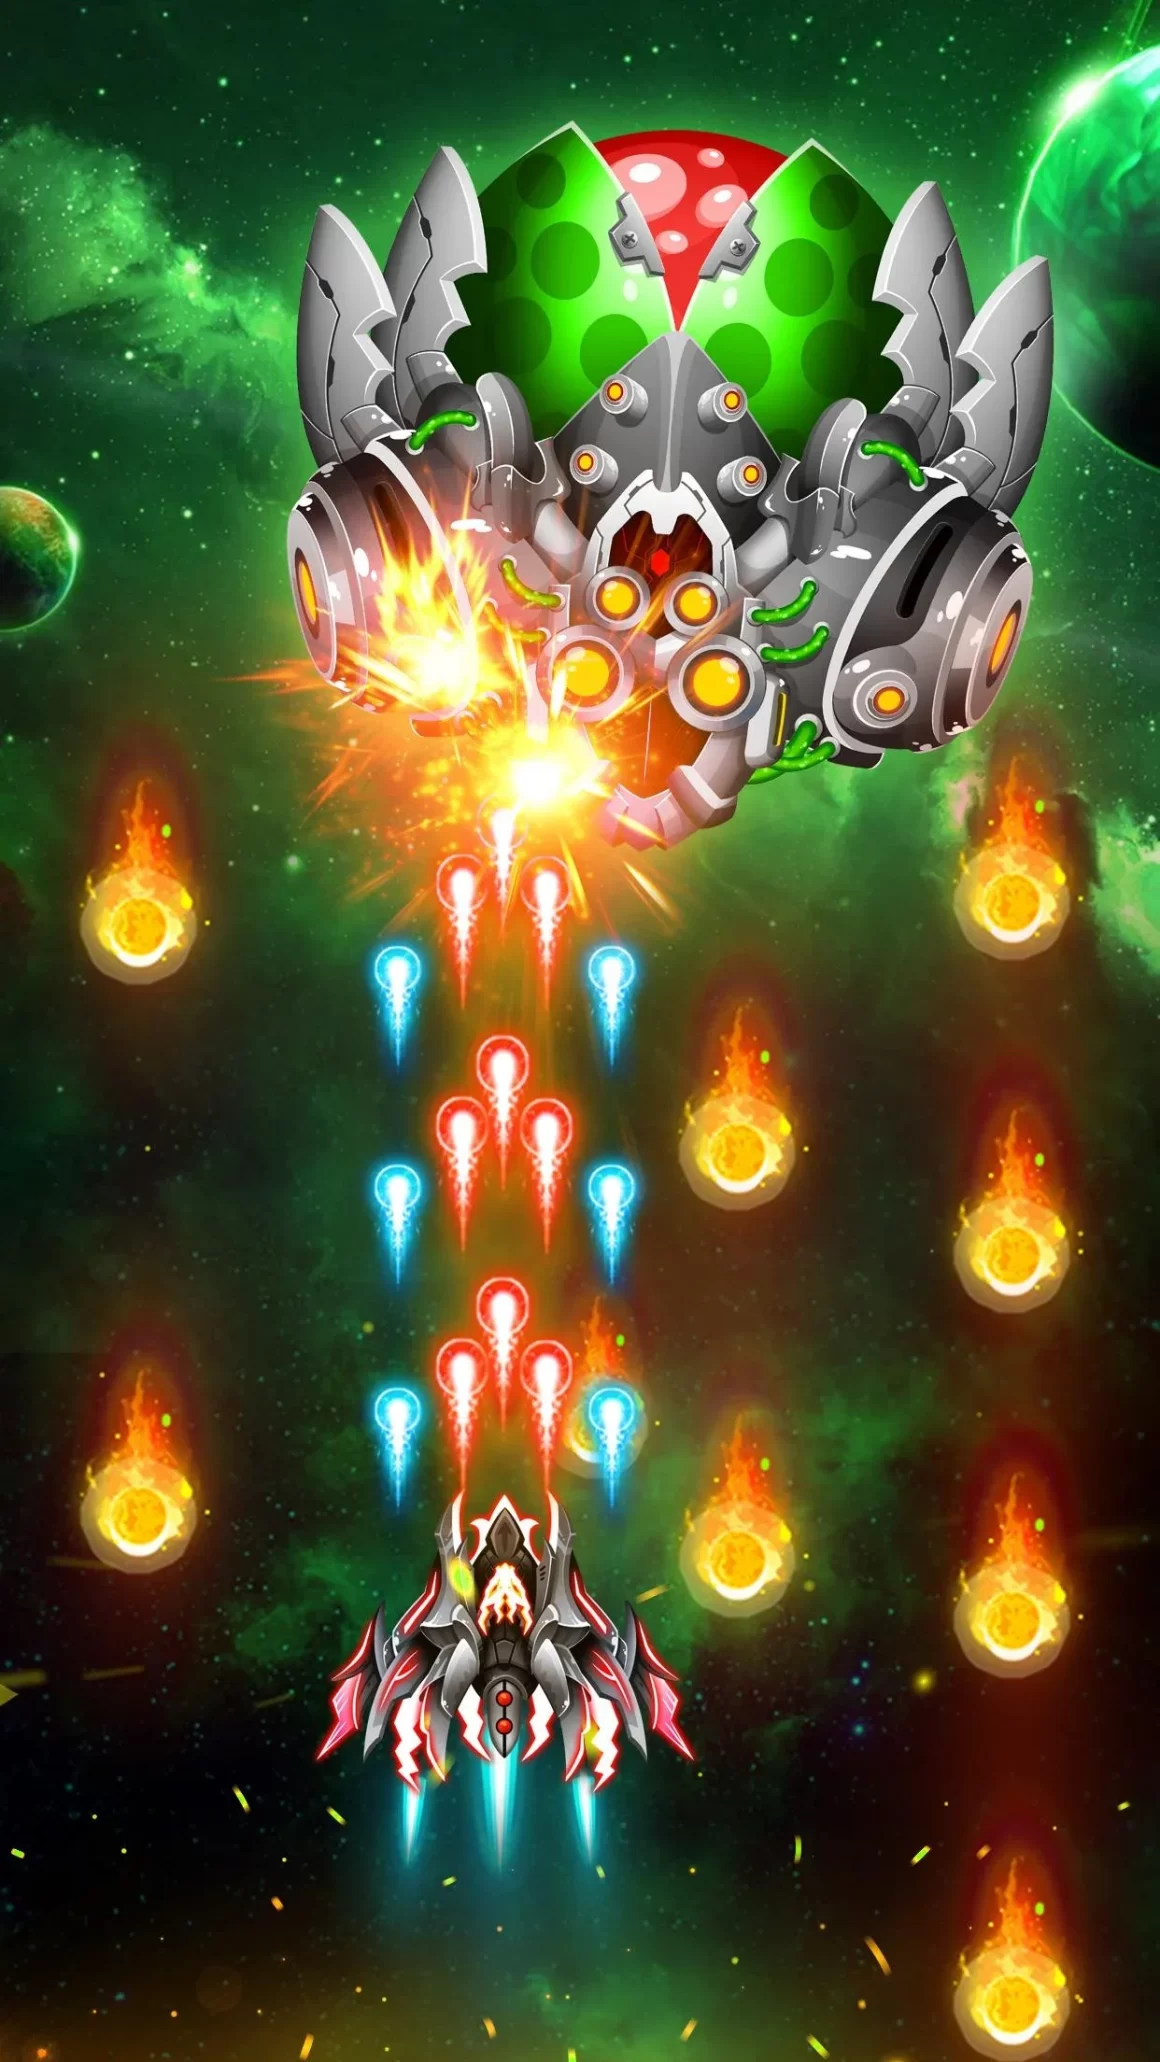 unnamed 55 1160x2062 - Space Shooter Mod Apk V1.777 (Unlimited Money) Unlocked